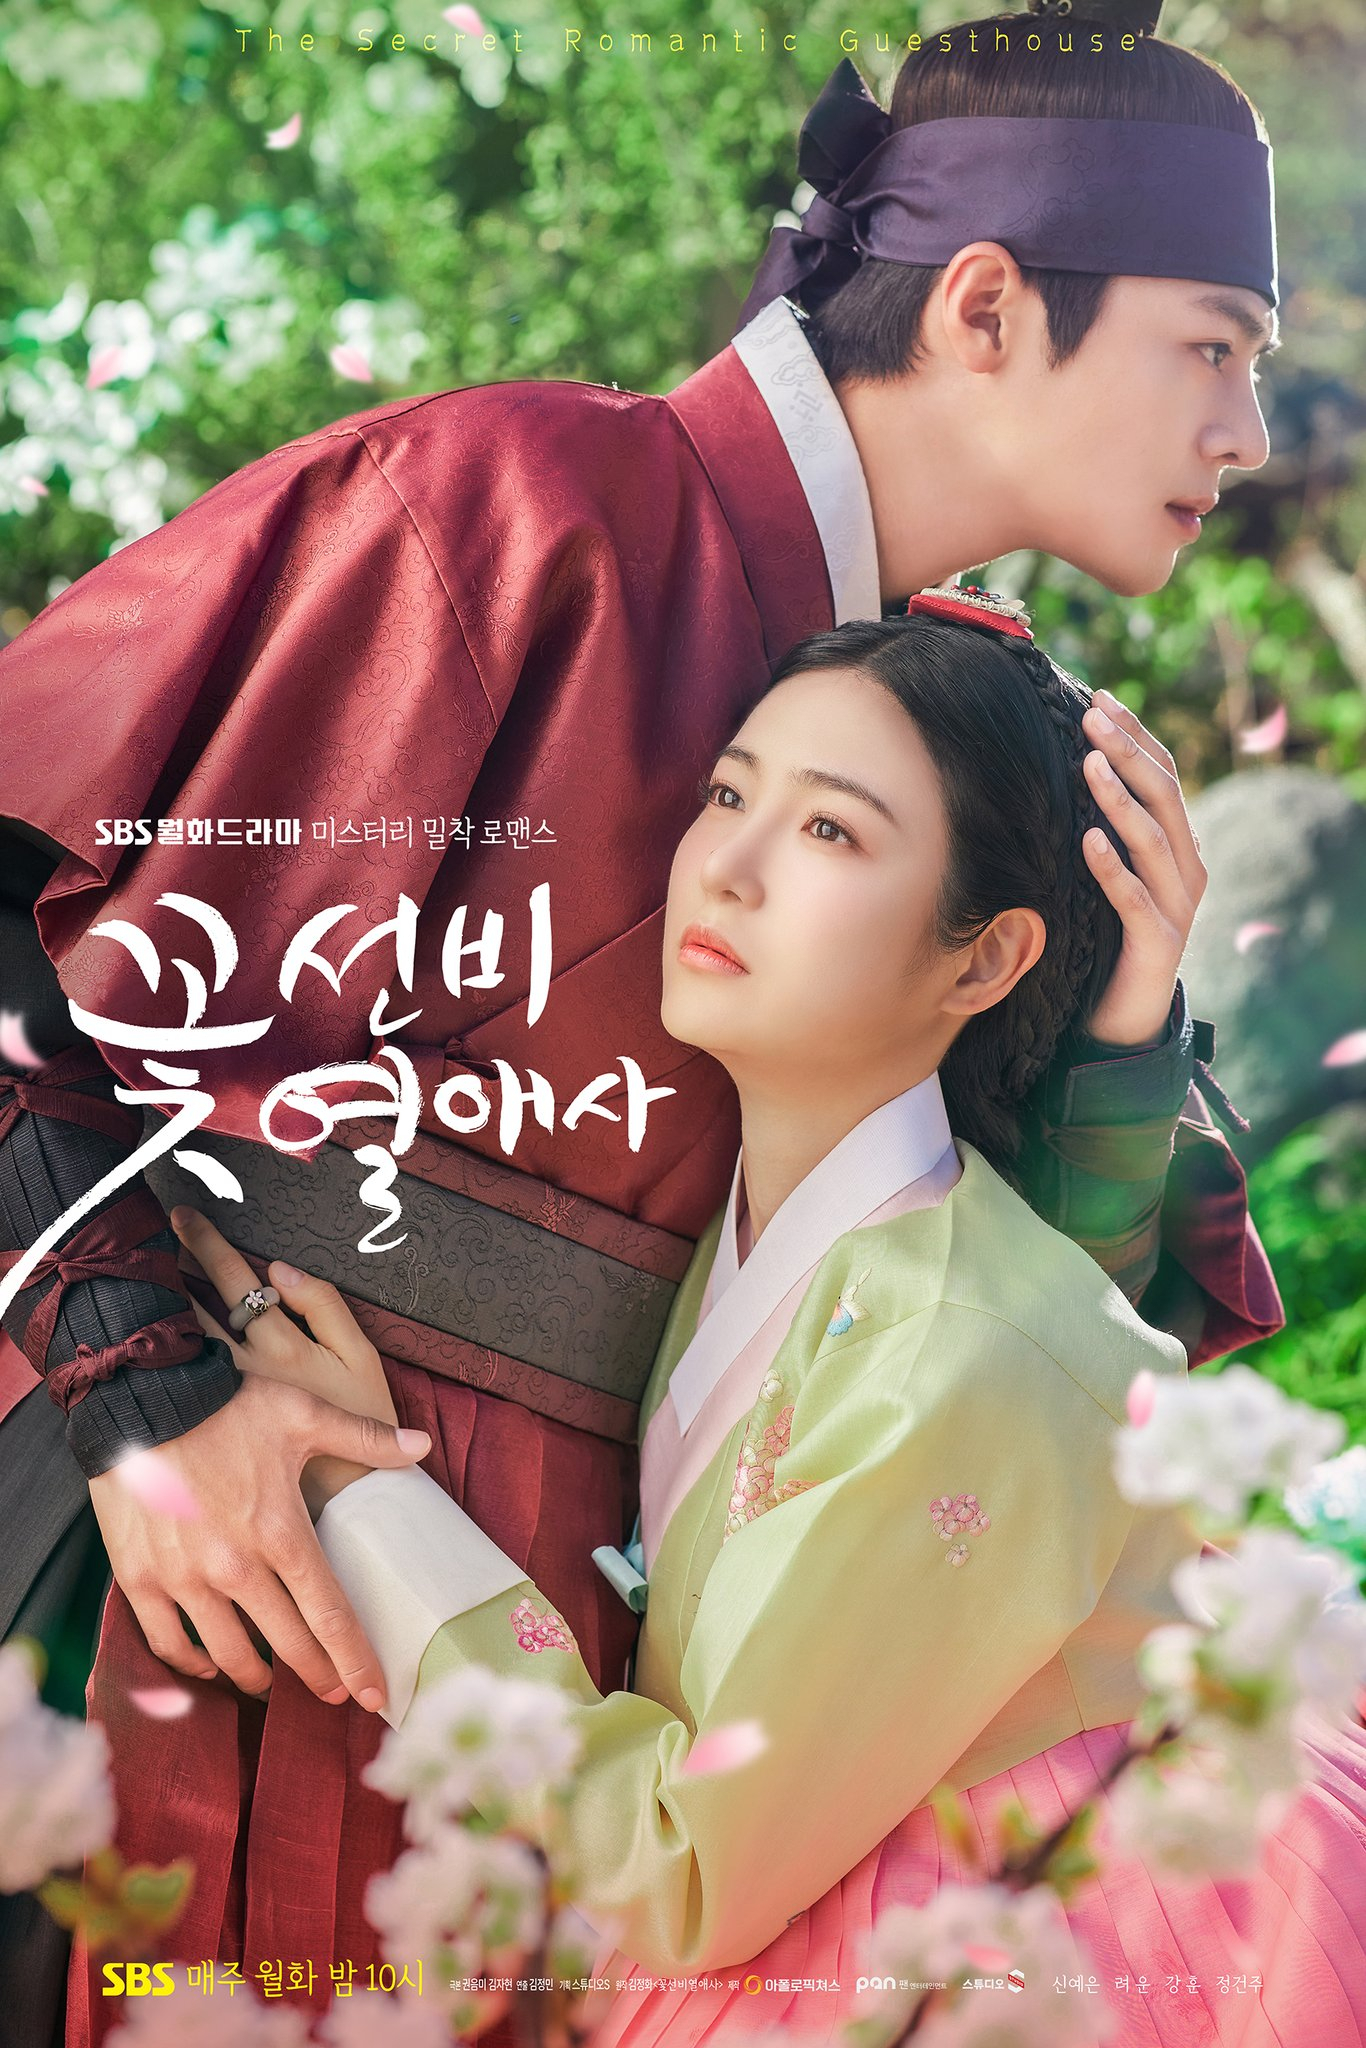 The Secret Romantic Guesthouse Episode 10 How to Watch, Airdate ...